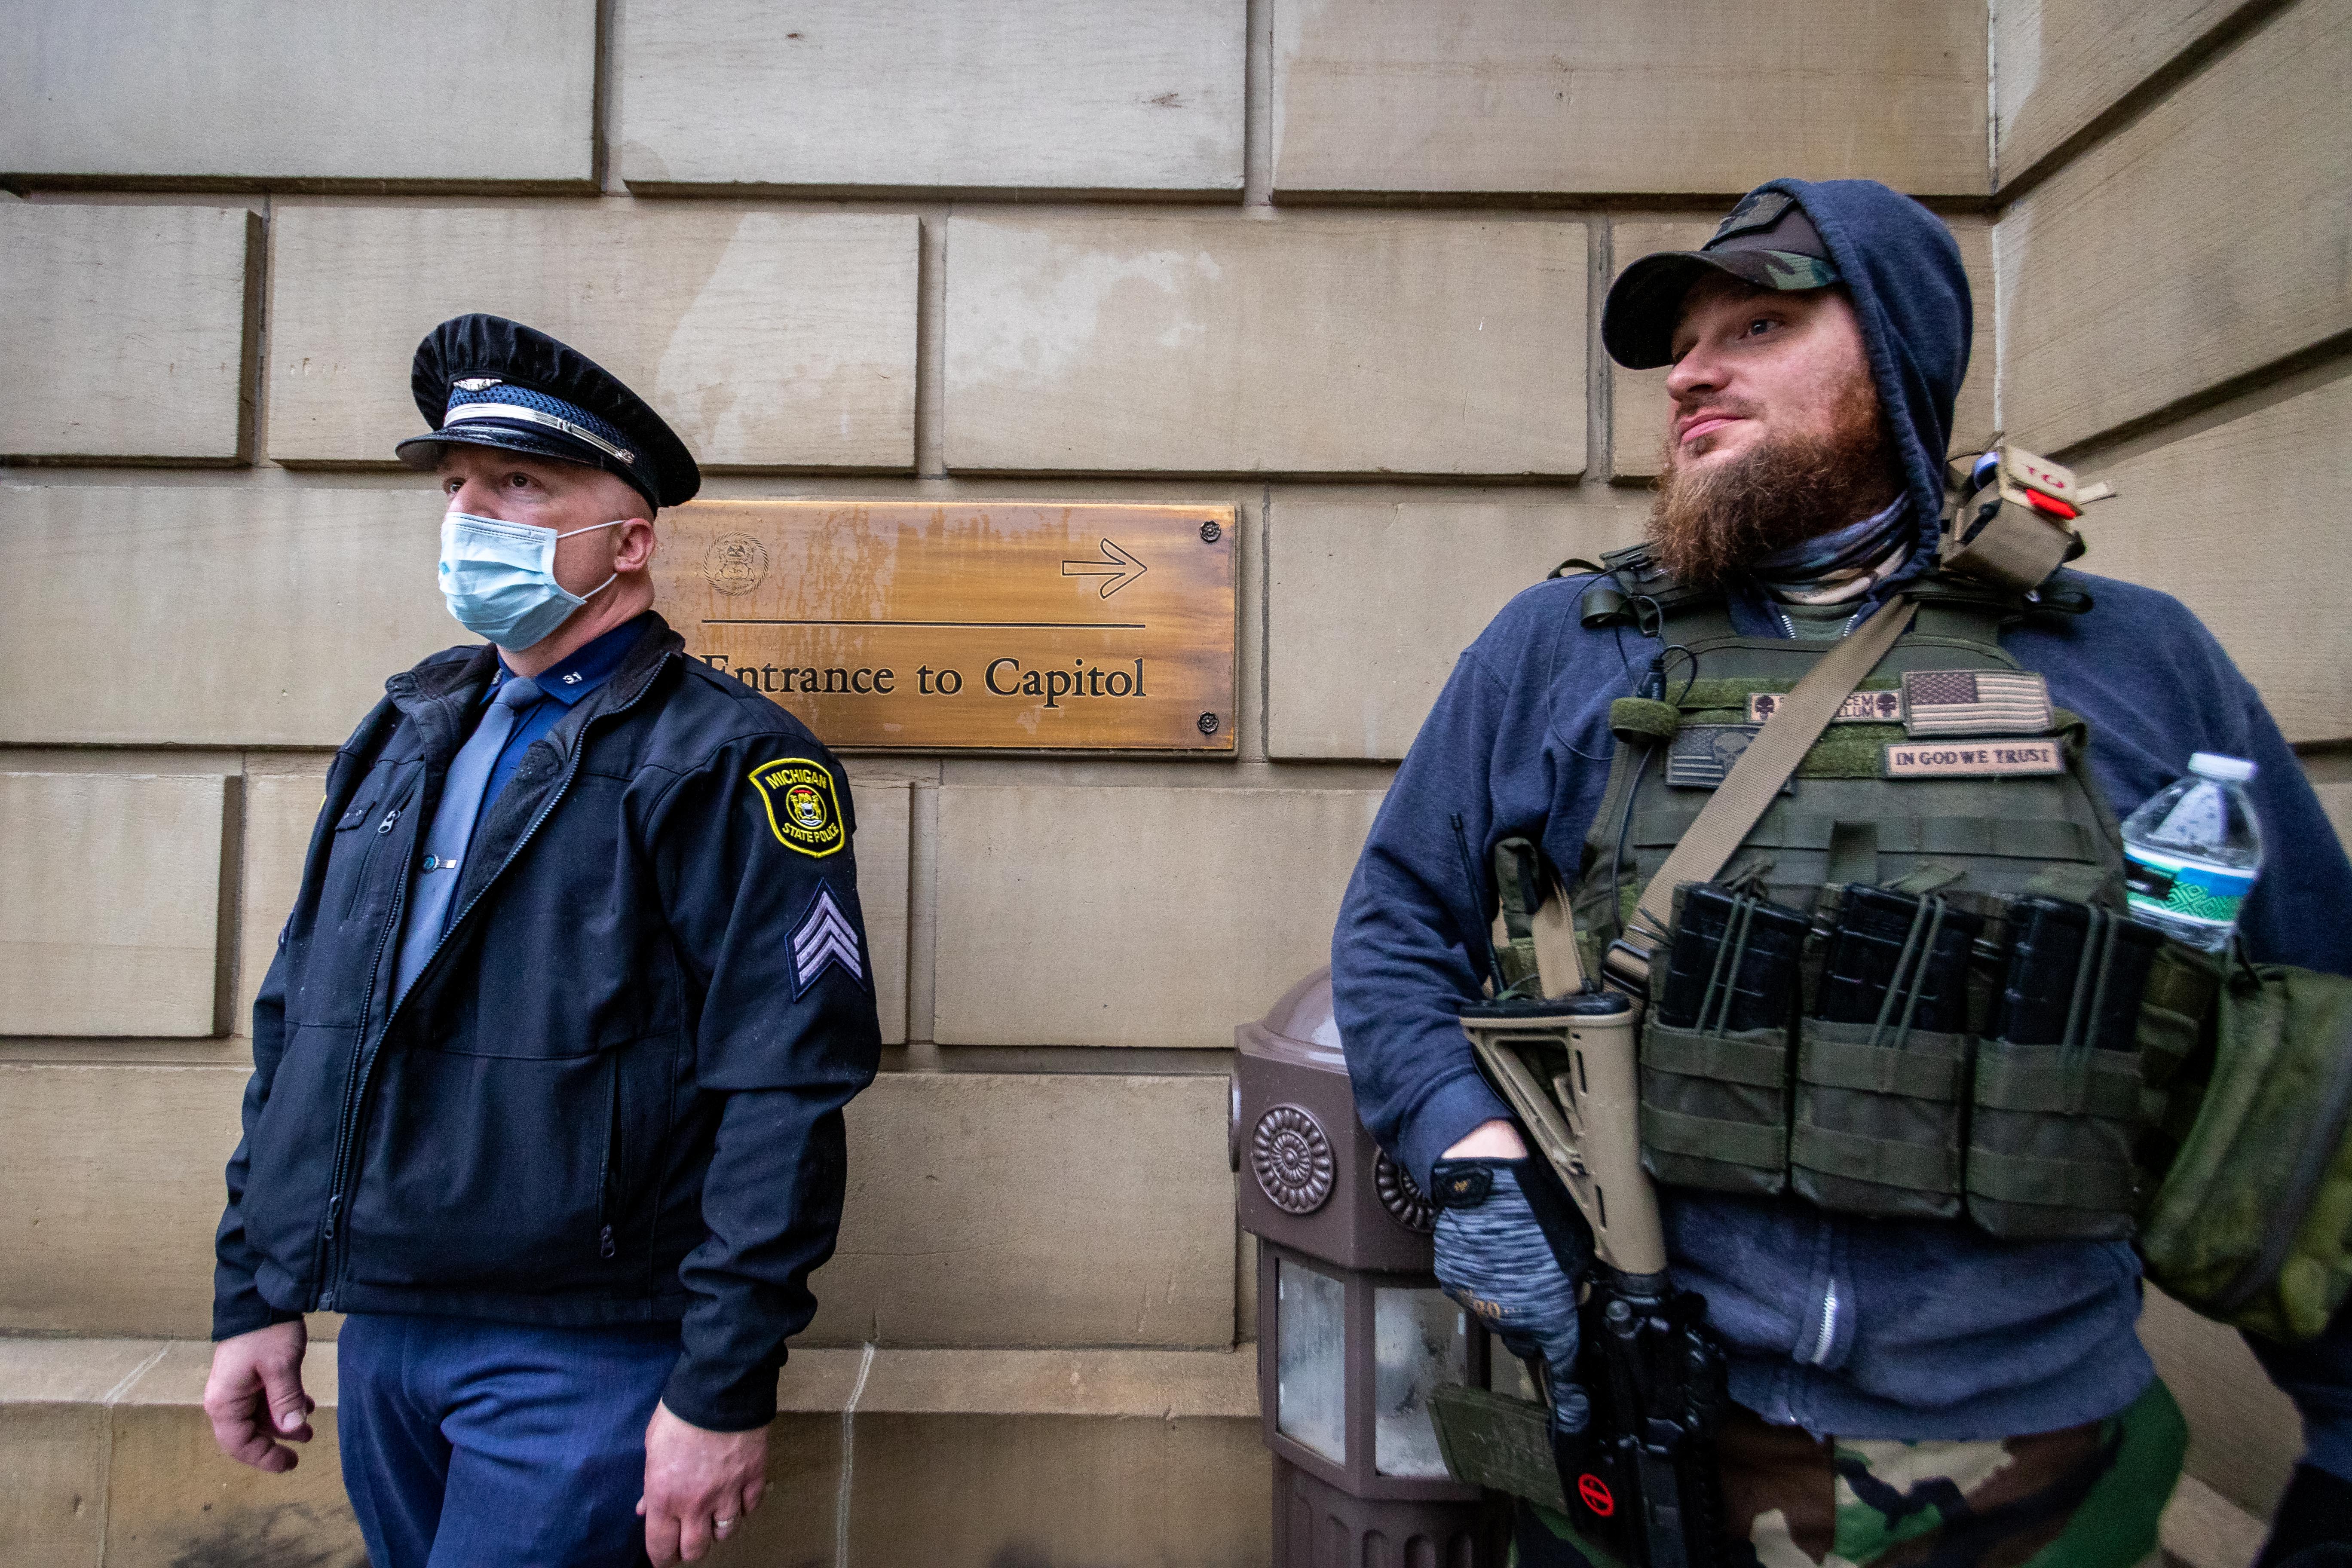 Michigan State trooper stands guard at the lower entrance to state Capitol building beside a protestors strapped with deadly weapons.